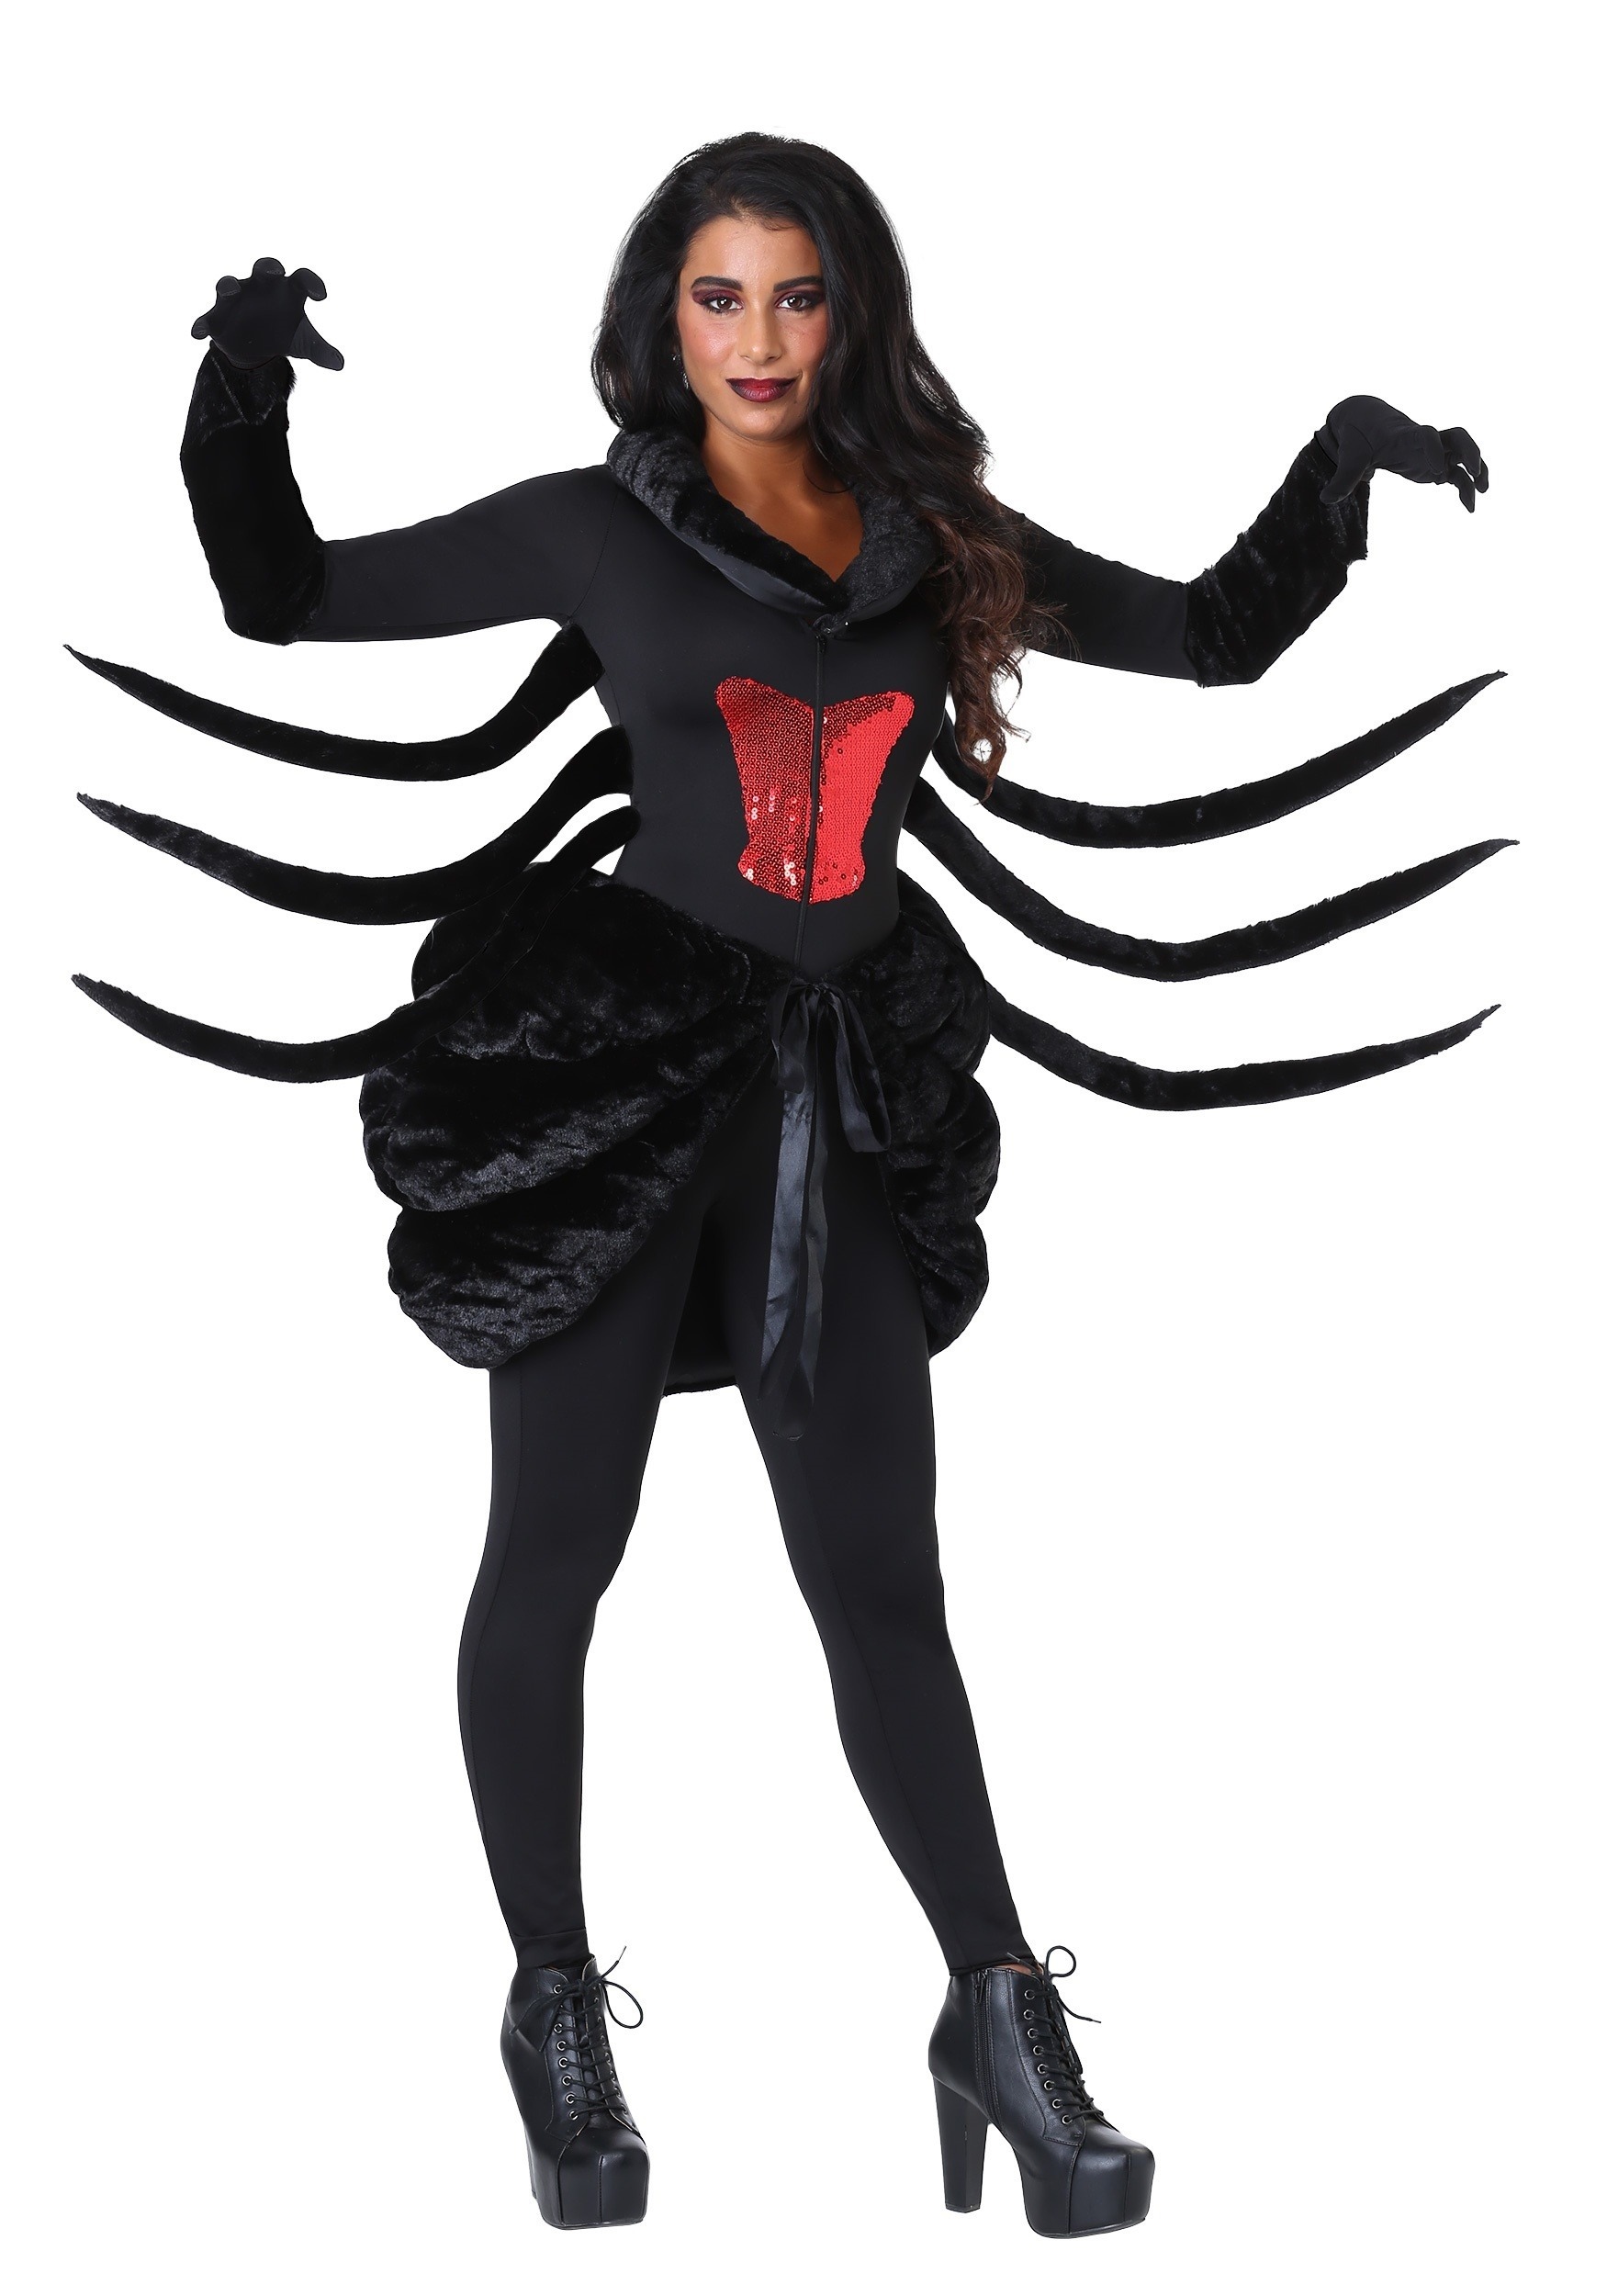 https://images.fun.com/products/45435/1-1/womens-plus-size-black-widow-costume.jpg